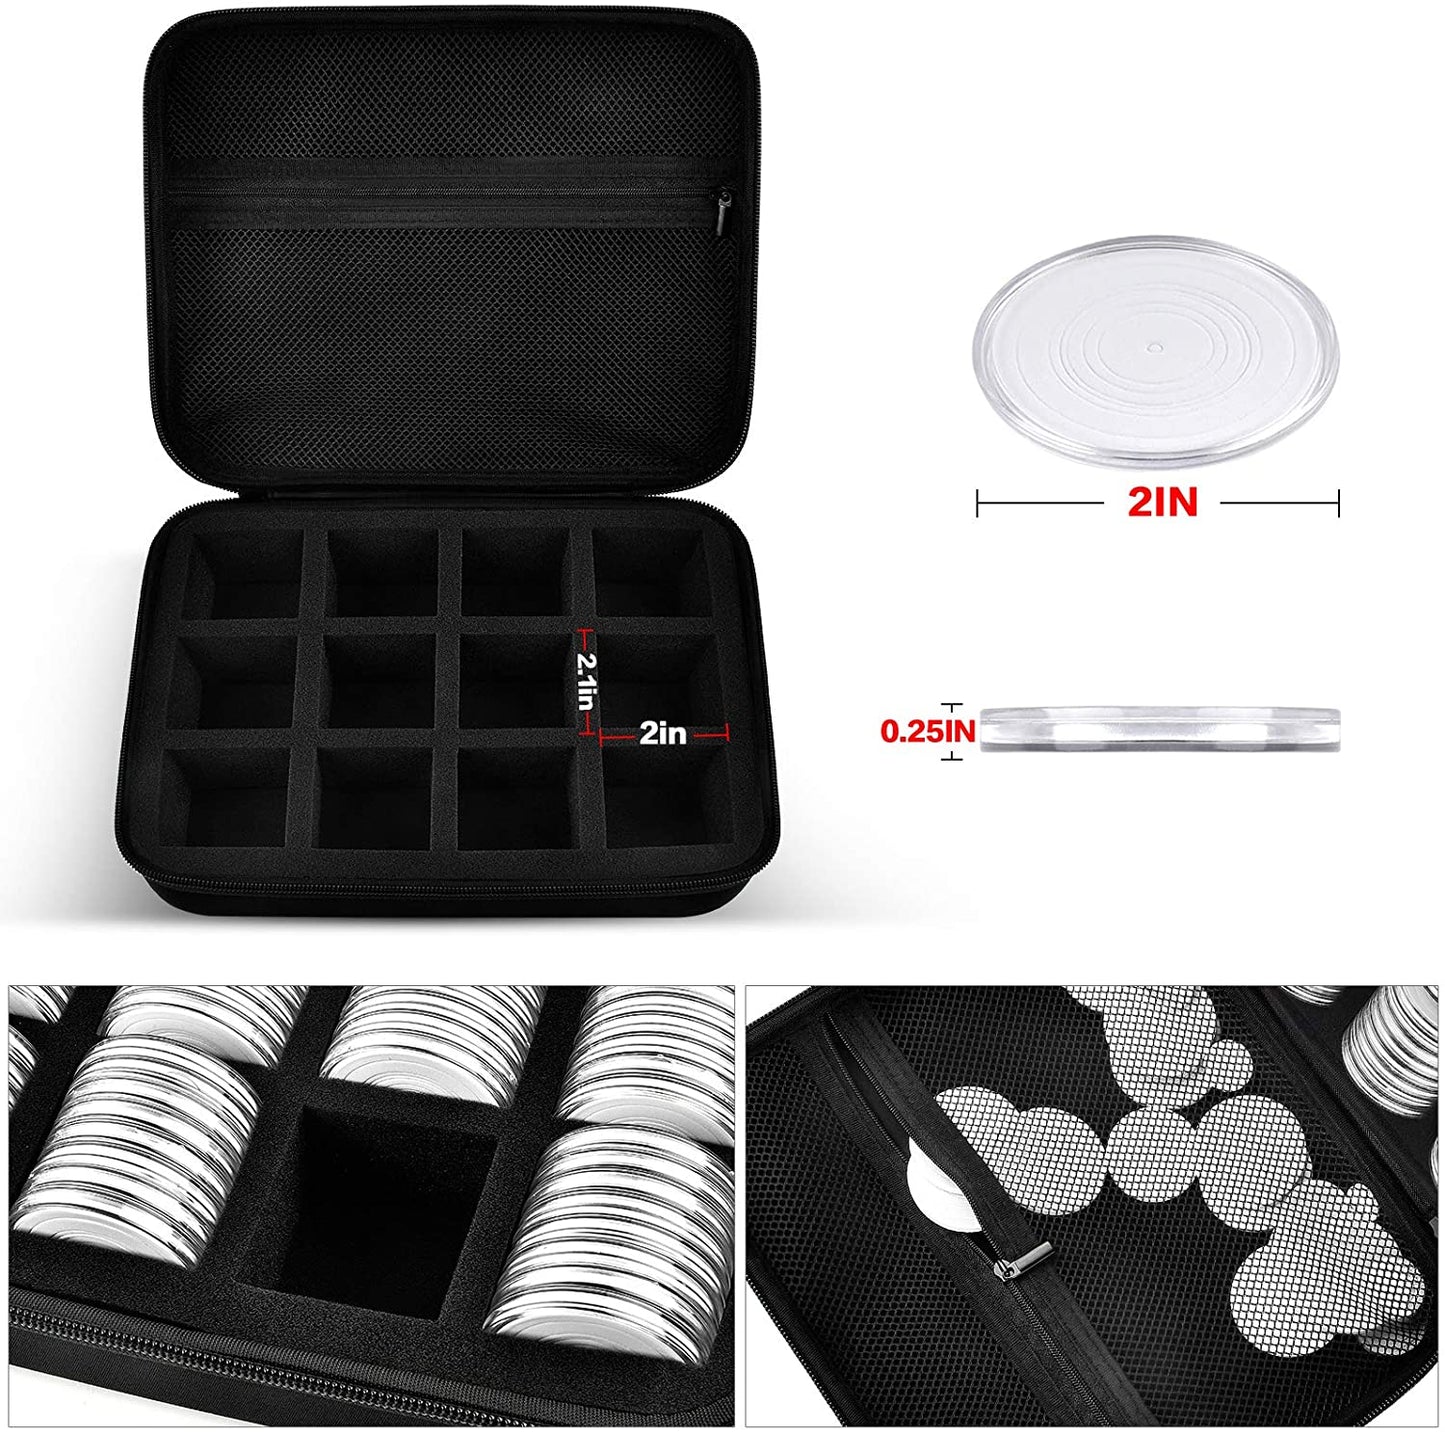 96 Pieces 46mm Coin Capsules, with Foam Gasket and Plastic Storage Organizer Box, 6 Sizes (20/25/27/30/38/46mm) Coins Collector Case Holder for Coin Collection Supplies